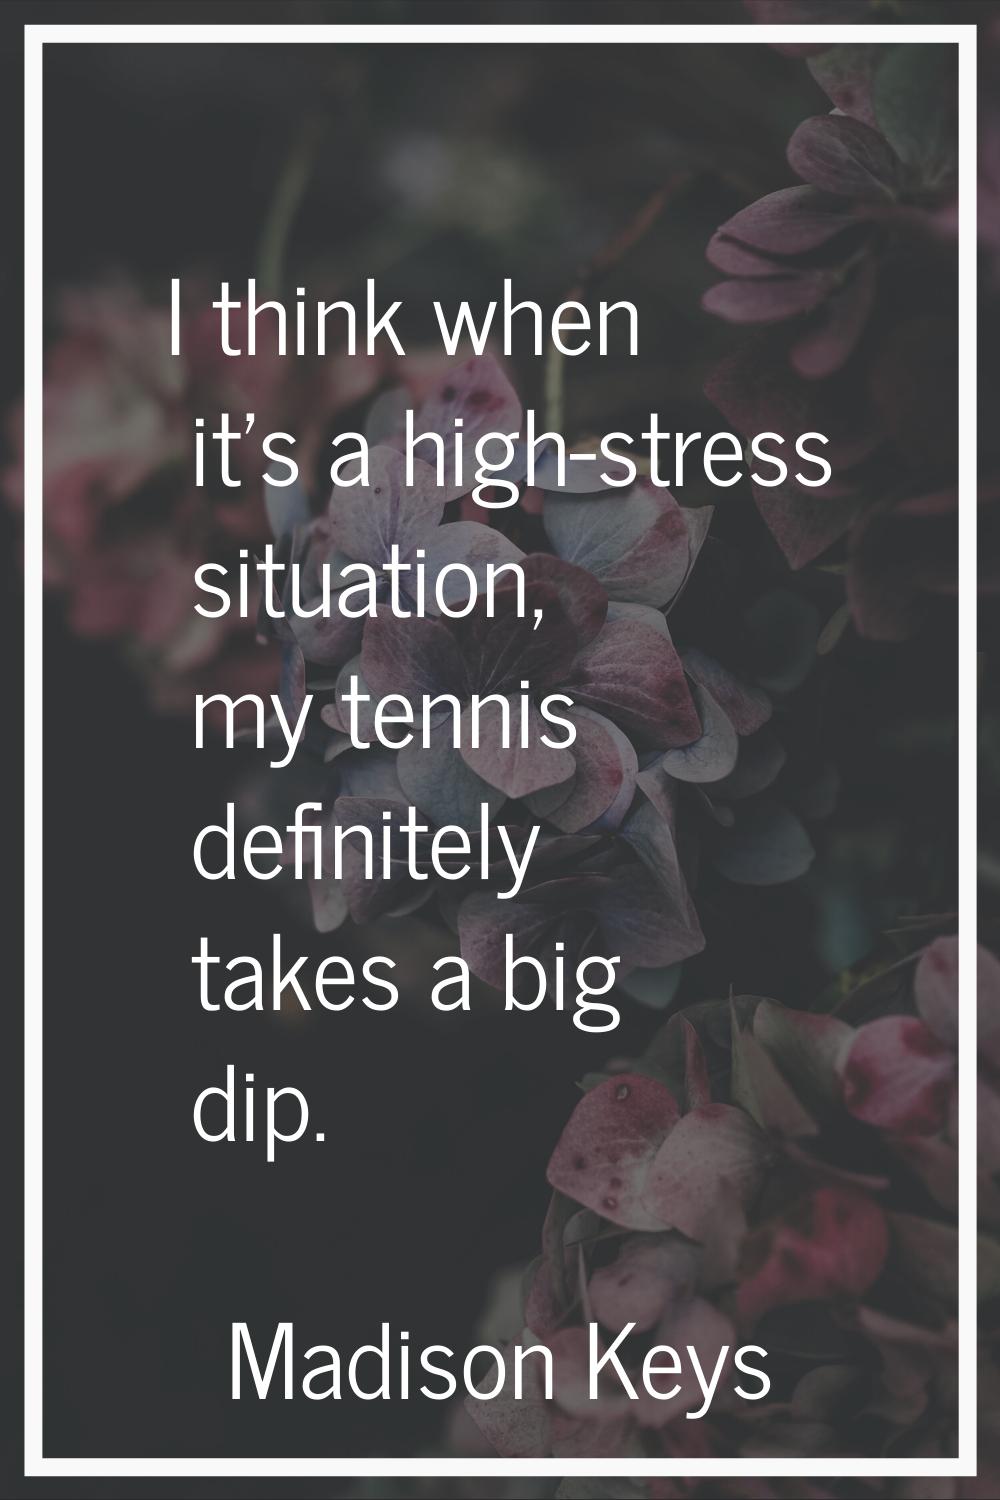 I think when it's a high-stress situation, my tennis definitely takes a big dip.